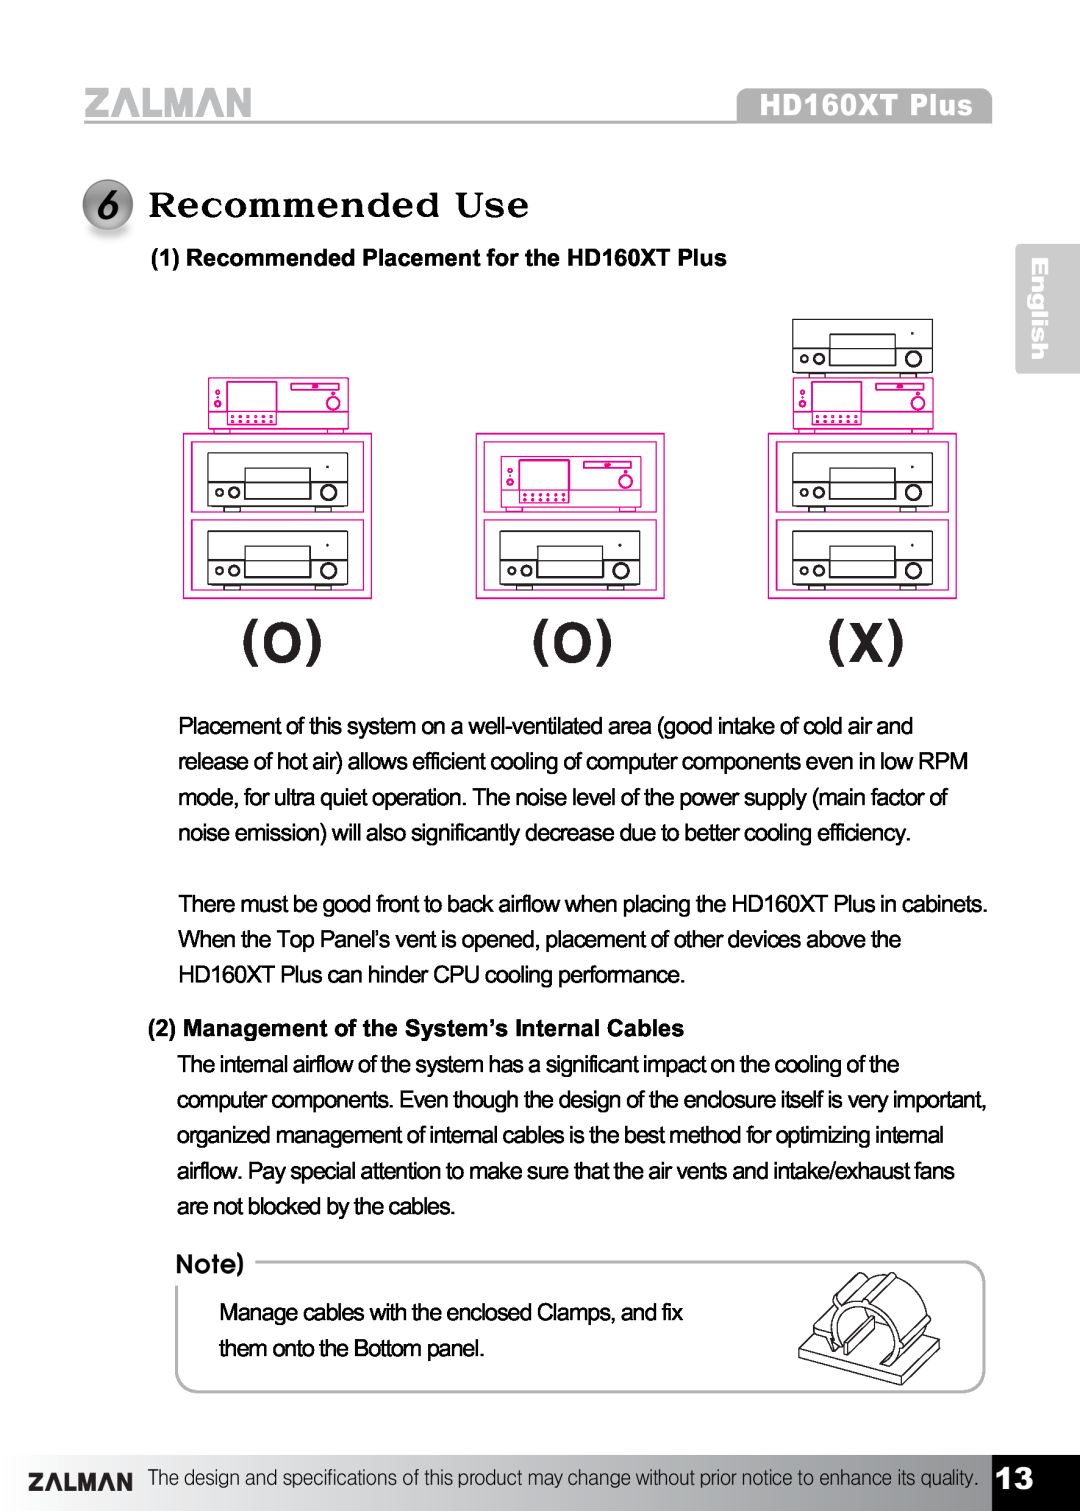 ZALMAN manual English, Recommended Placement for the HD160XT Plus, Management of the System’s Internal Cables 